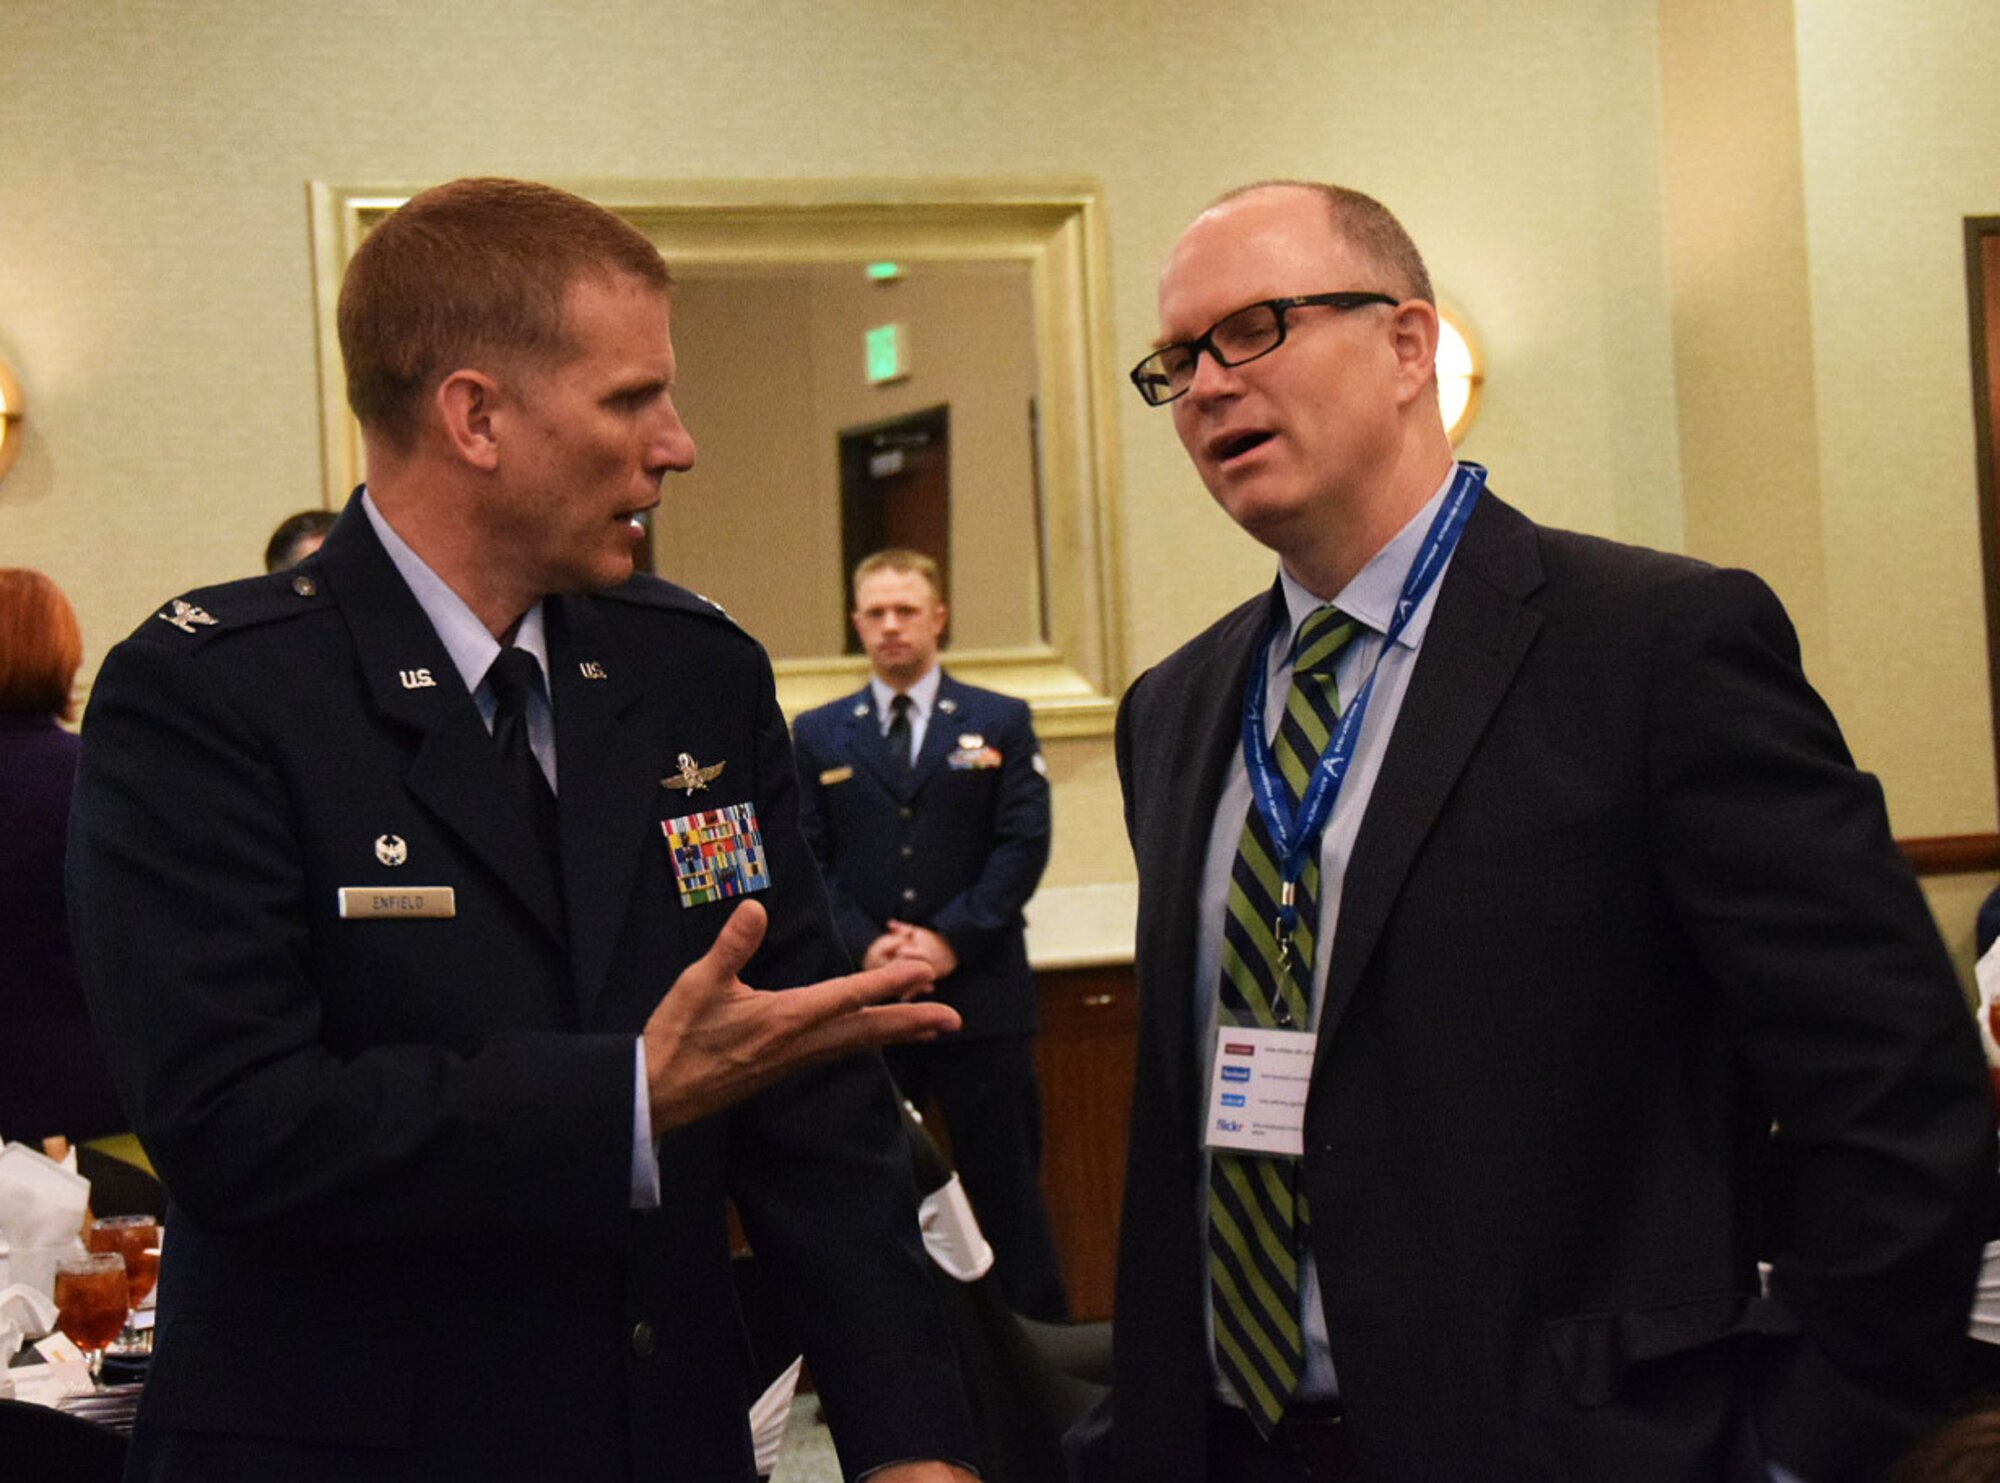 Col. David W. Enfield, 433rd Mission Support Group commander (left) talks with Clay Richmond, vice president of JSWC, Ltd., prior to the Honorary Commanders induction ceremony April 1, 2017 in San Antonio, Texas. The wing welcomed 16 new honorary commanders into the program. U.S. Air Force photo by Tech. Sgt. Carlos J. Treviño)